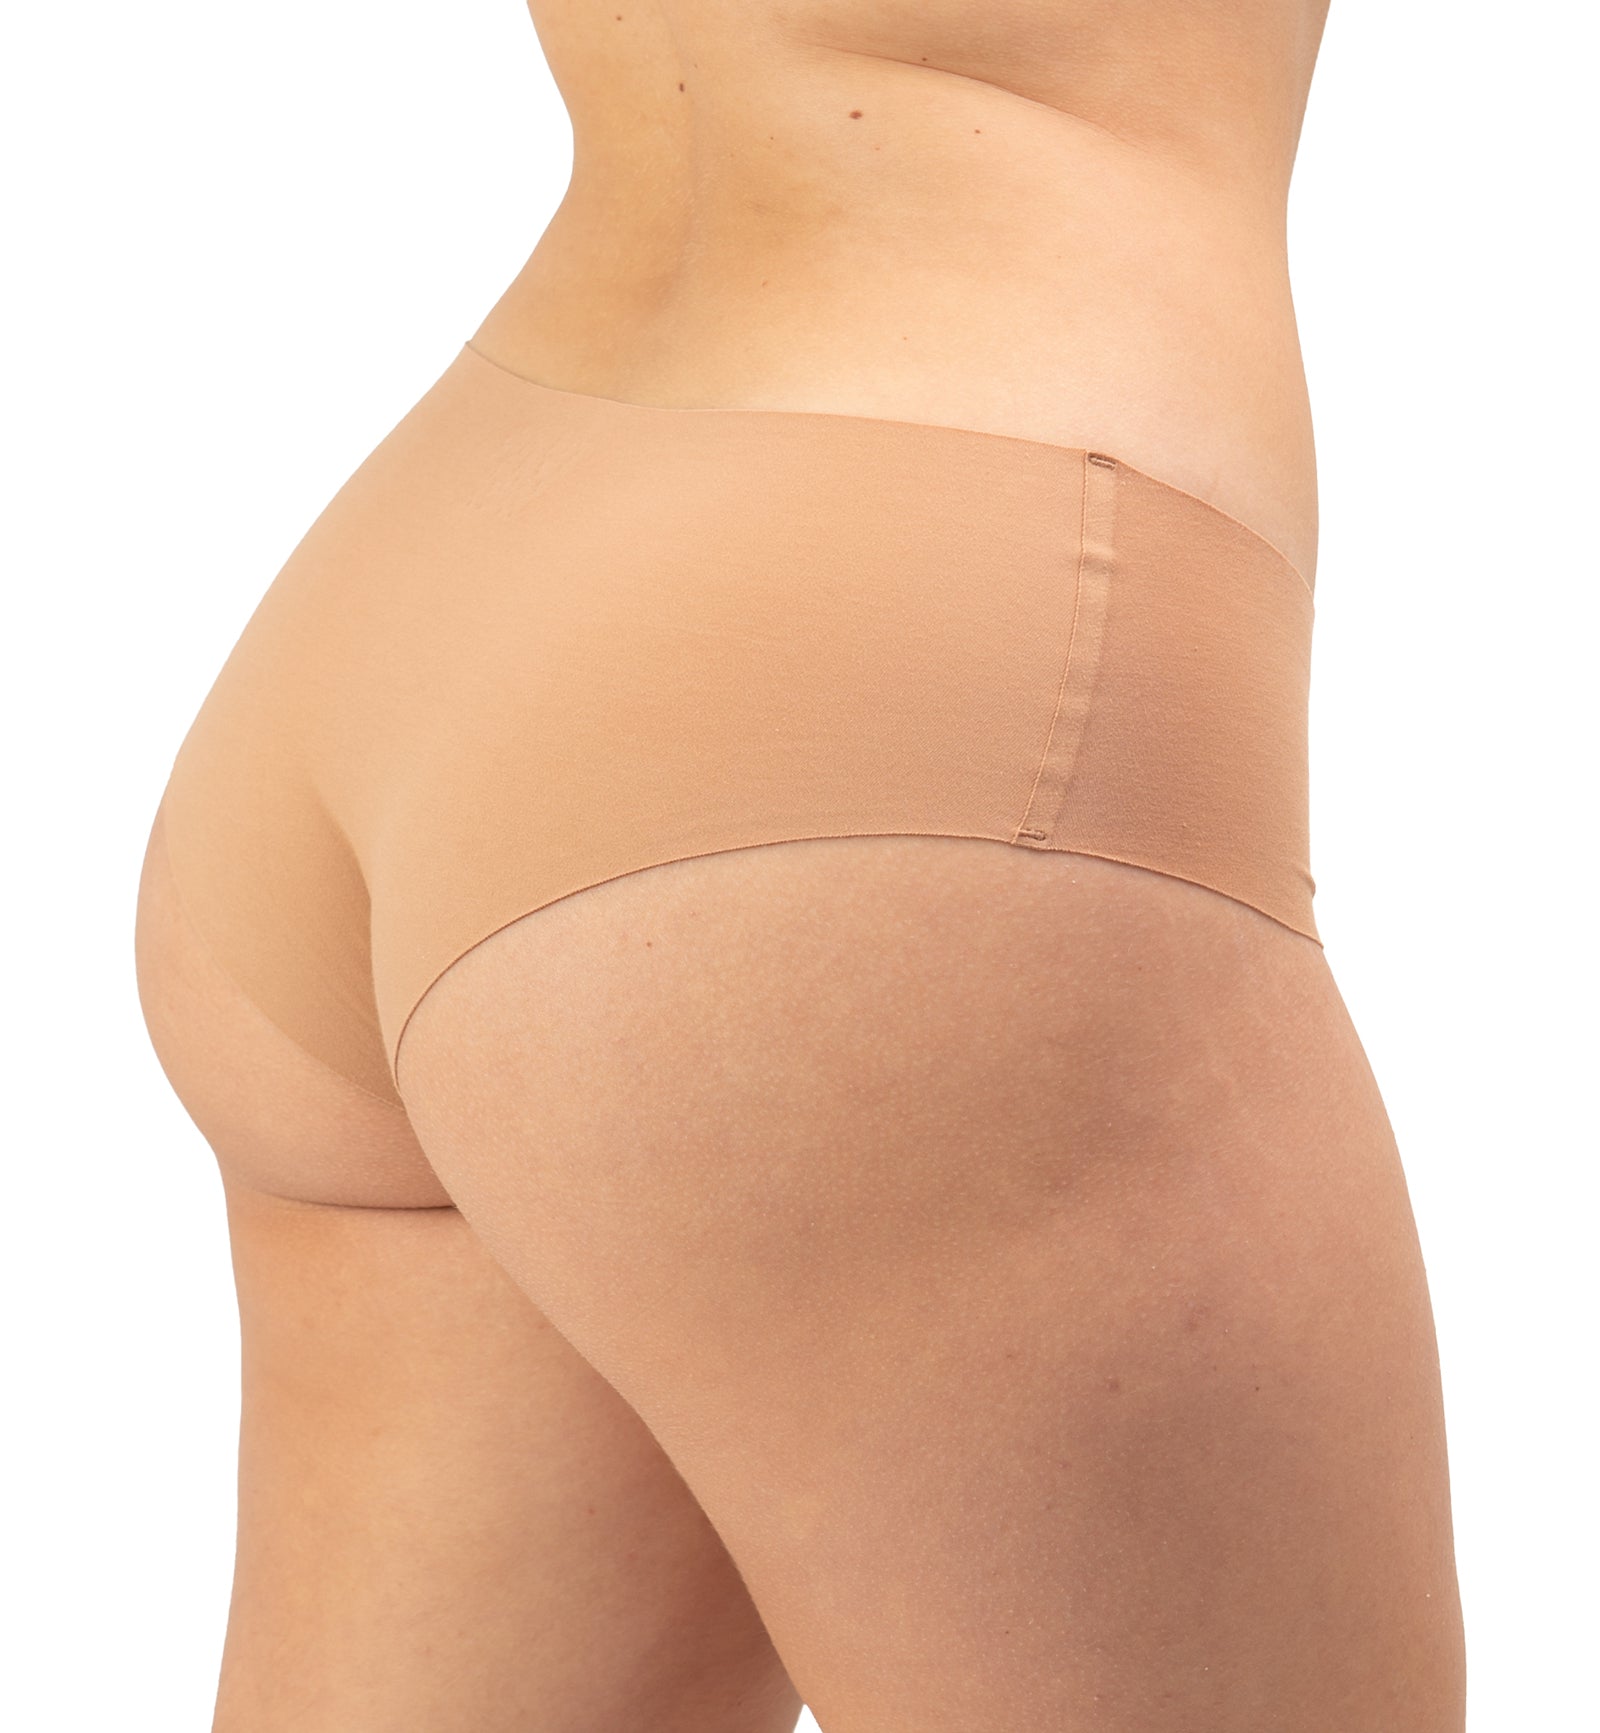 Panty Promise Low Rise Hipster,XS,Sand - Sand,XS